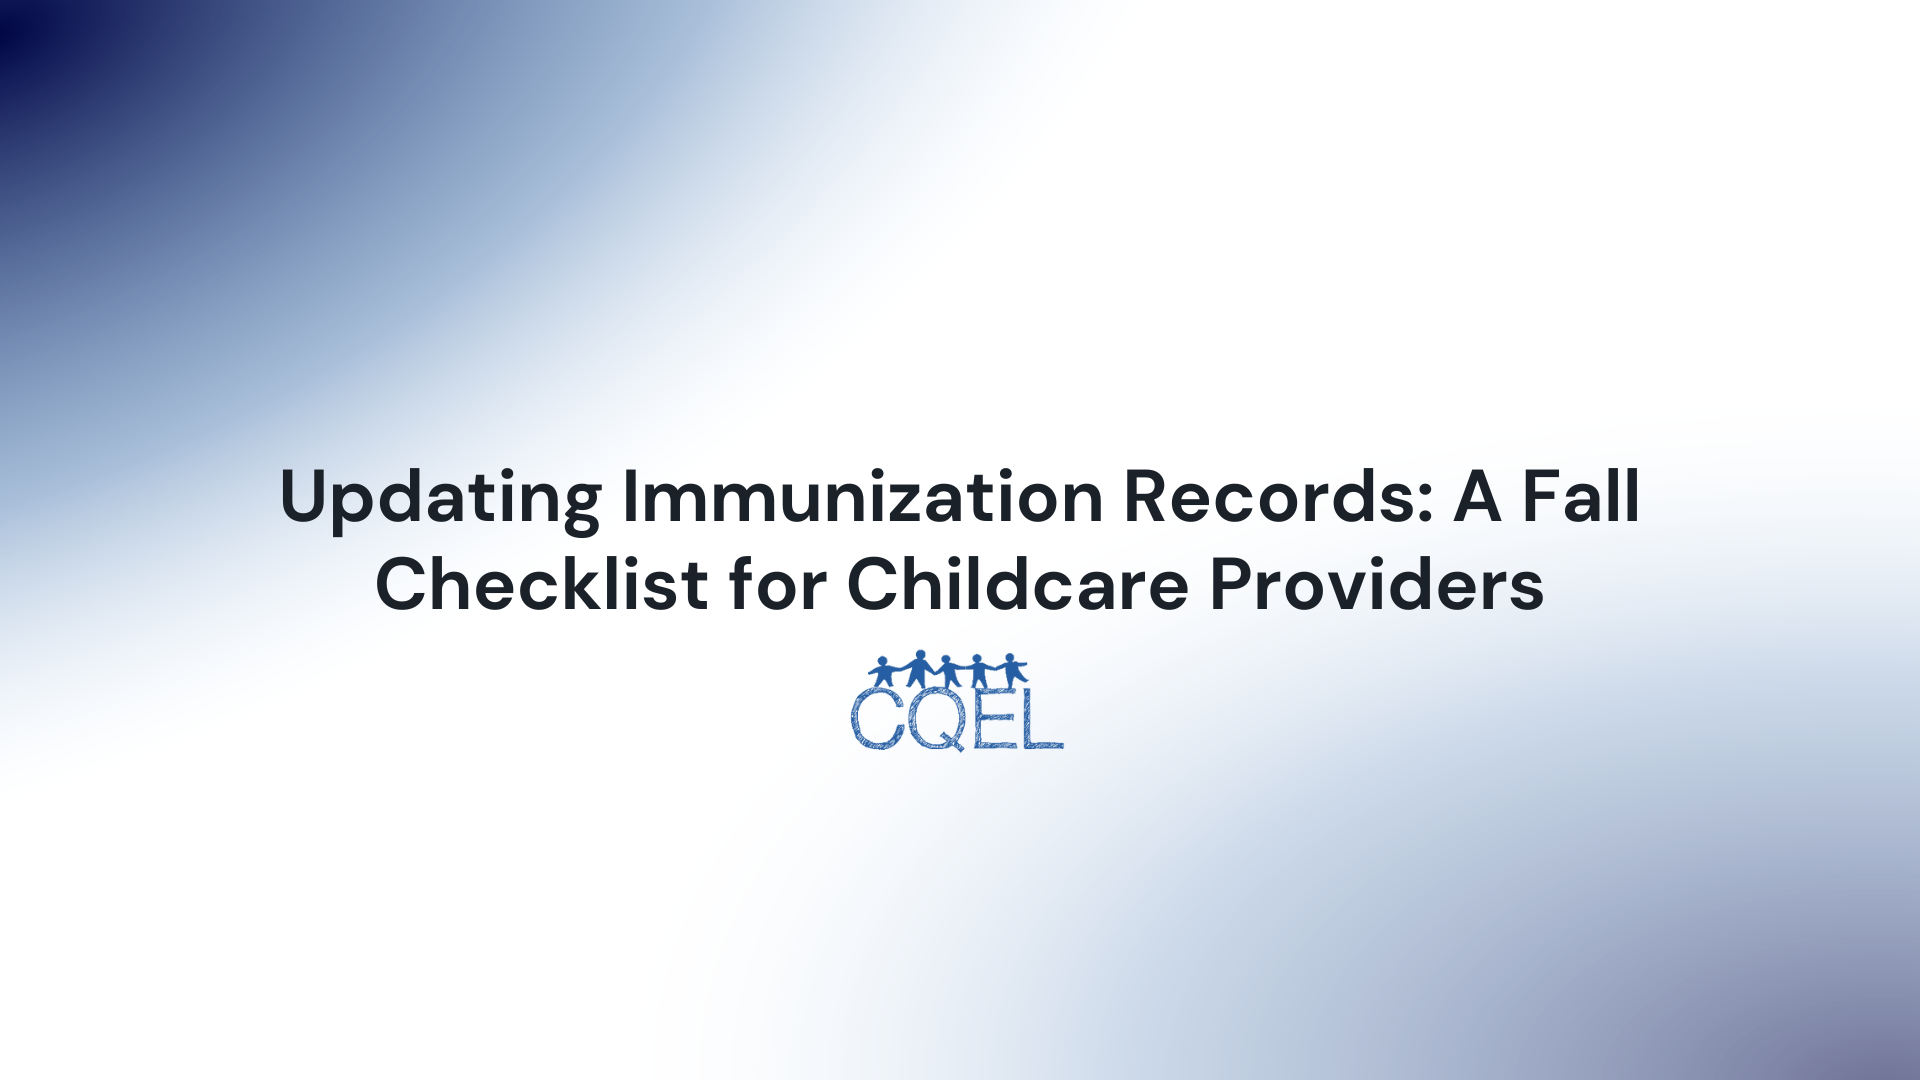 Updating Immunization Records: A Fall Checklist for Childcare Providers